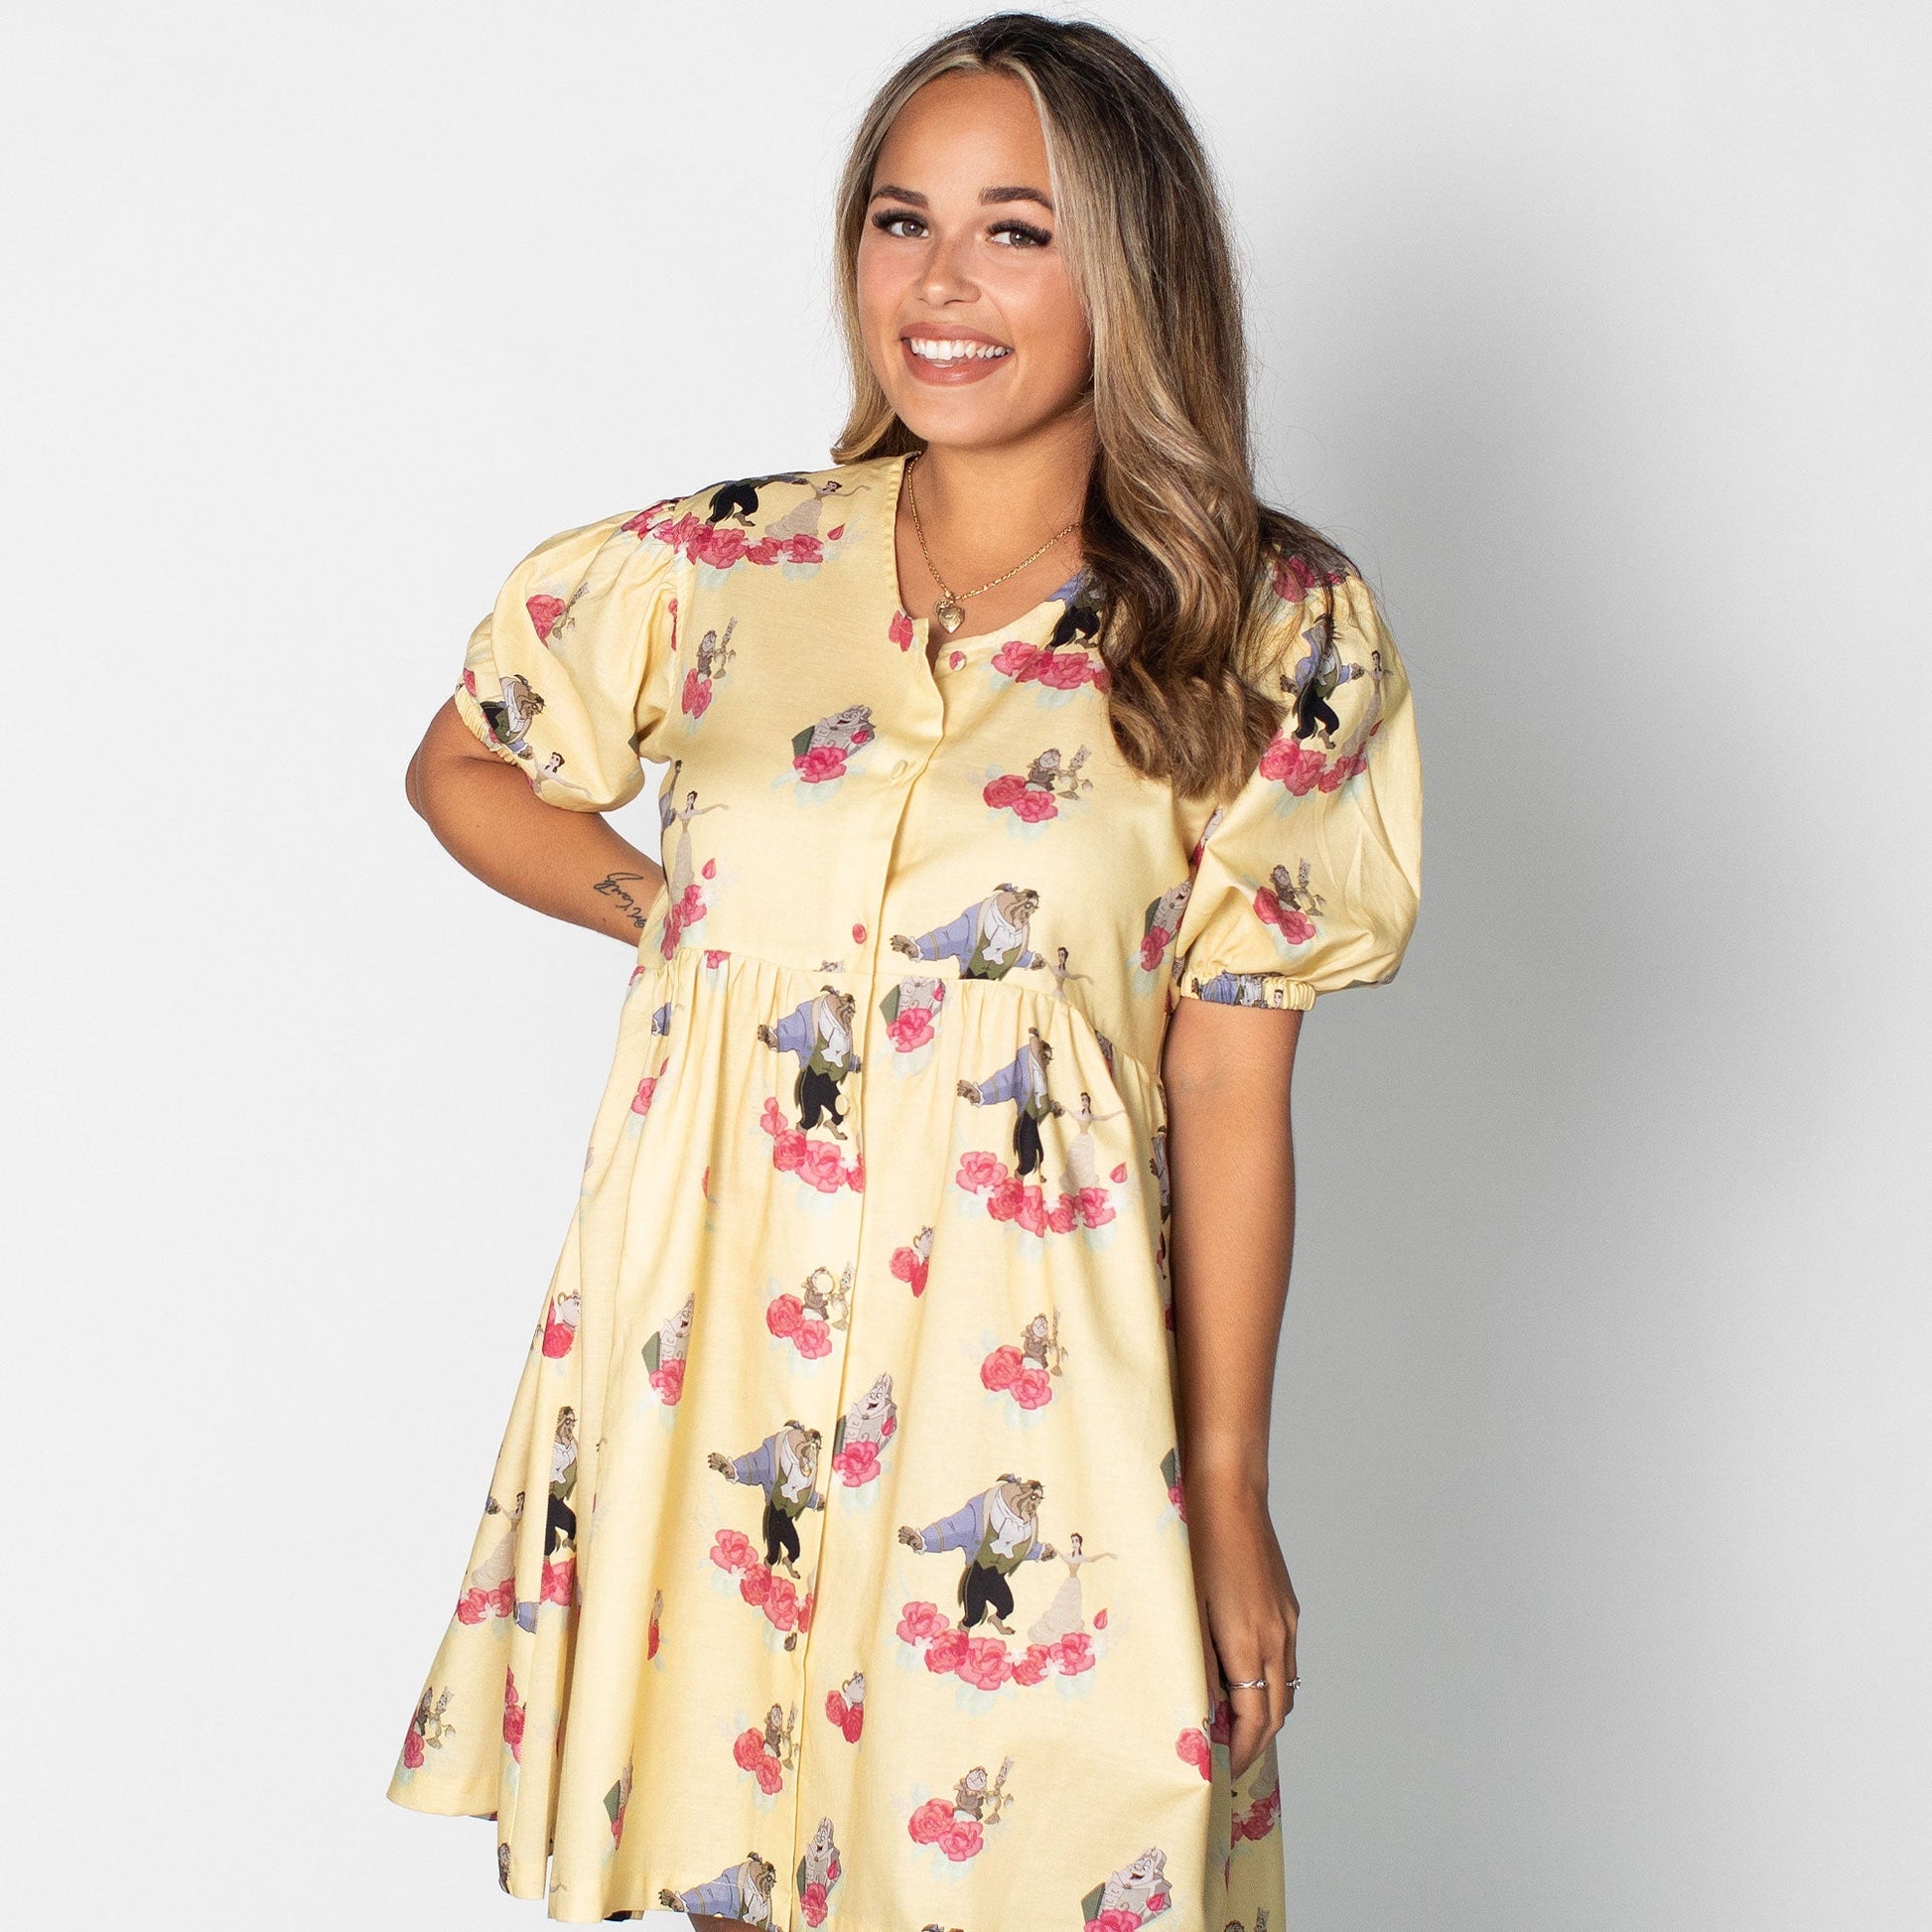 Beauty and the Beast Puffy Sleeve Dress - Rockamilly-Dresses-Vintage